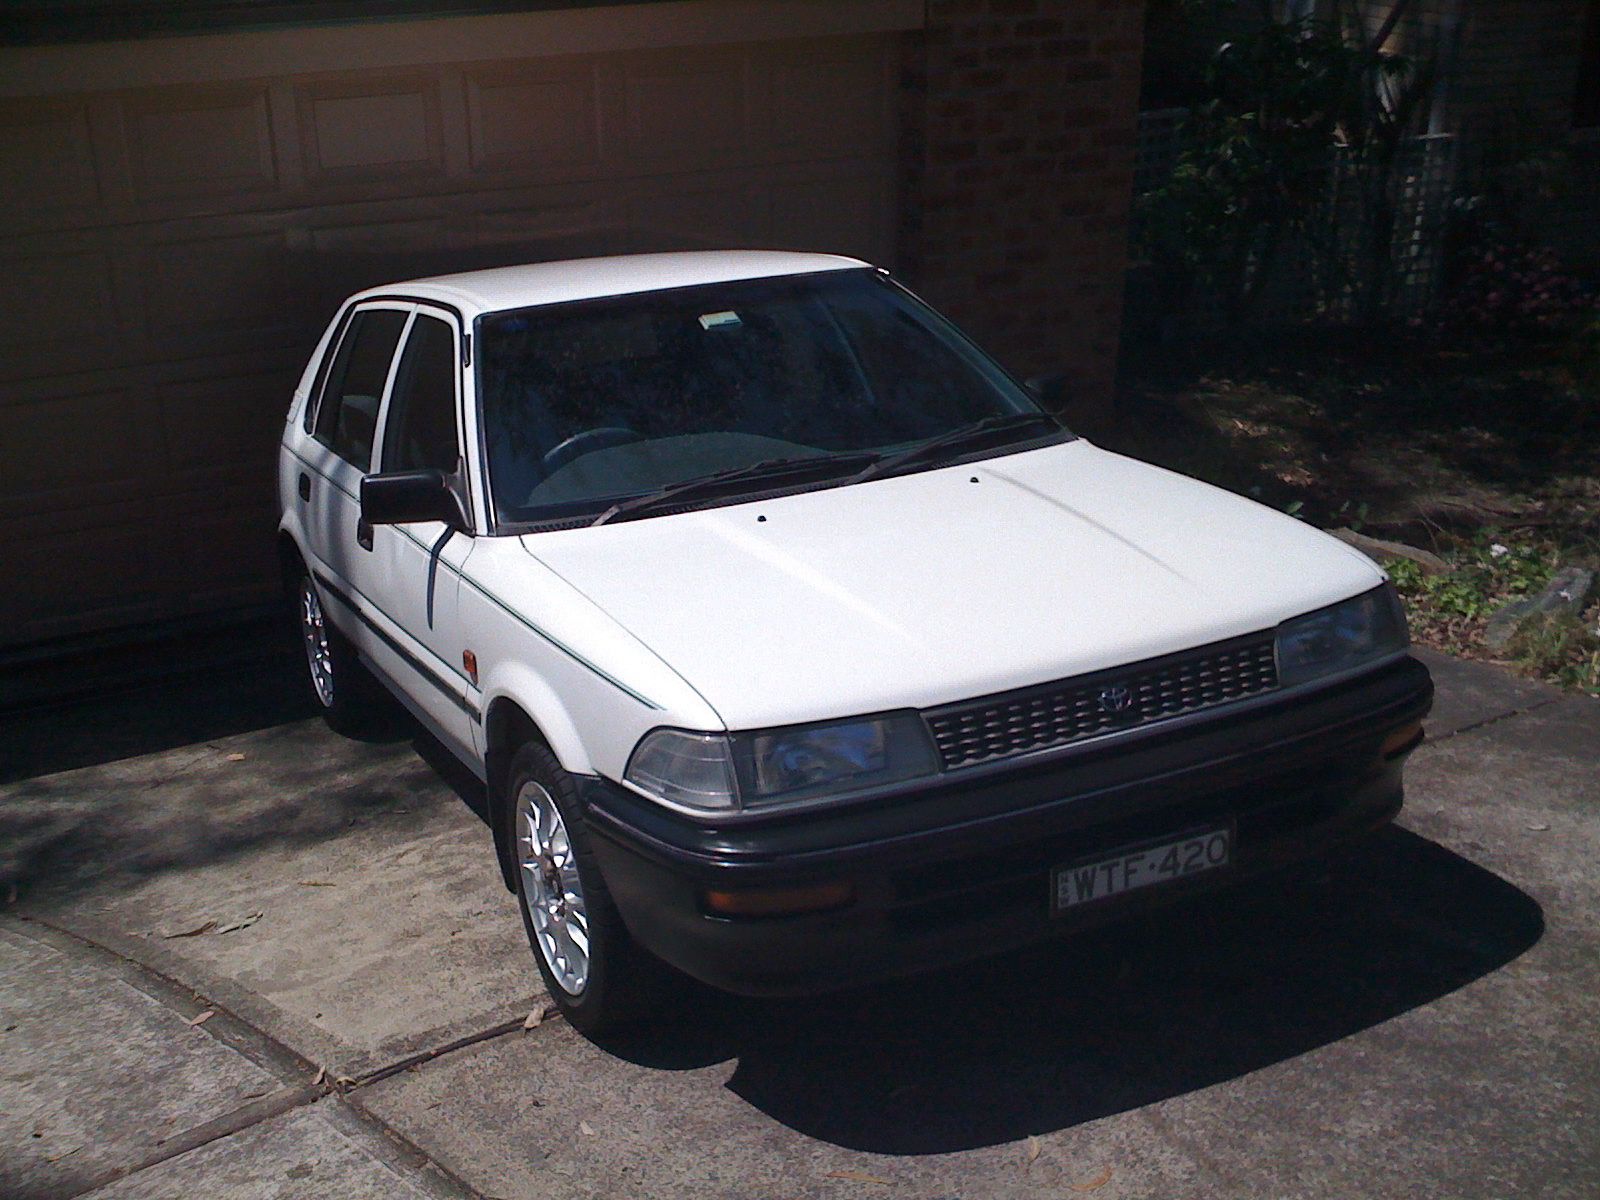 A photo of a white 1993 Toyota Corolla hatchback with low-profile tyres, lace-style rims, and numberplates that say "WTF420". It's very shiny and clean-looking.